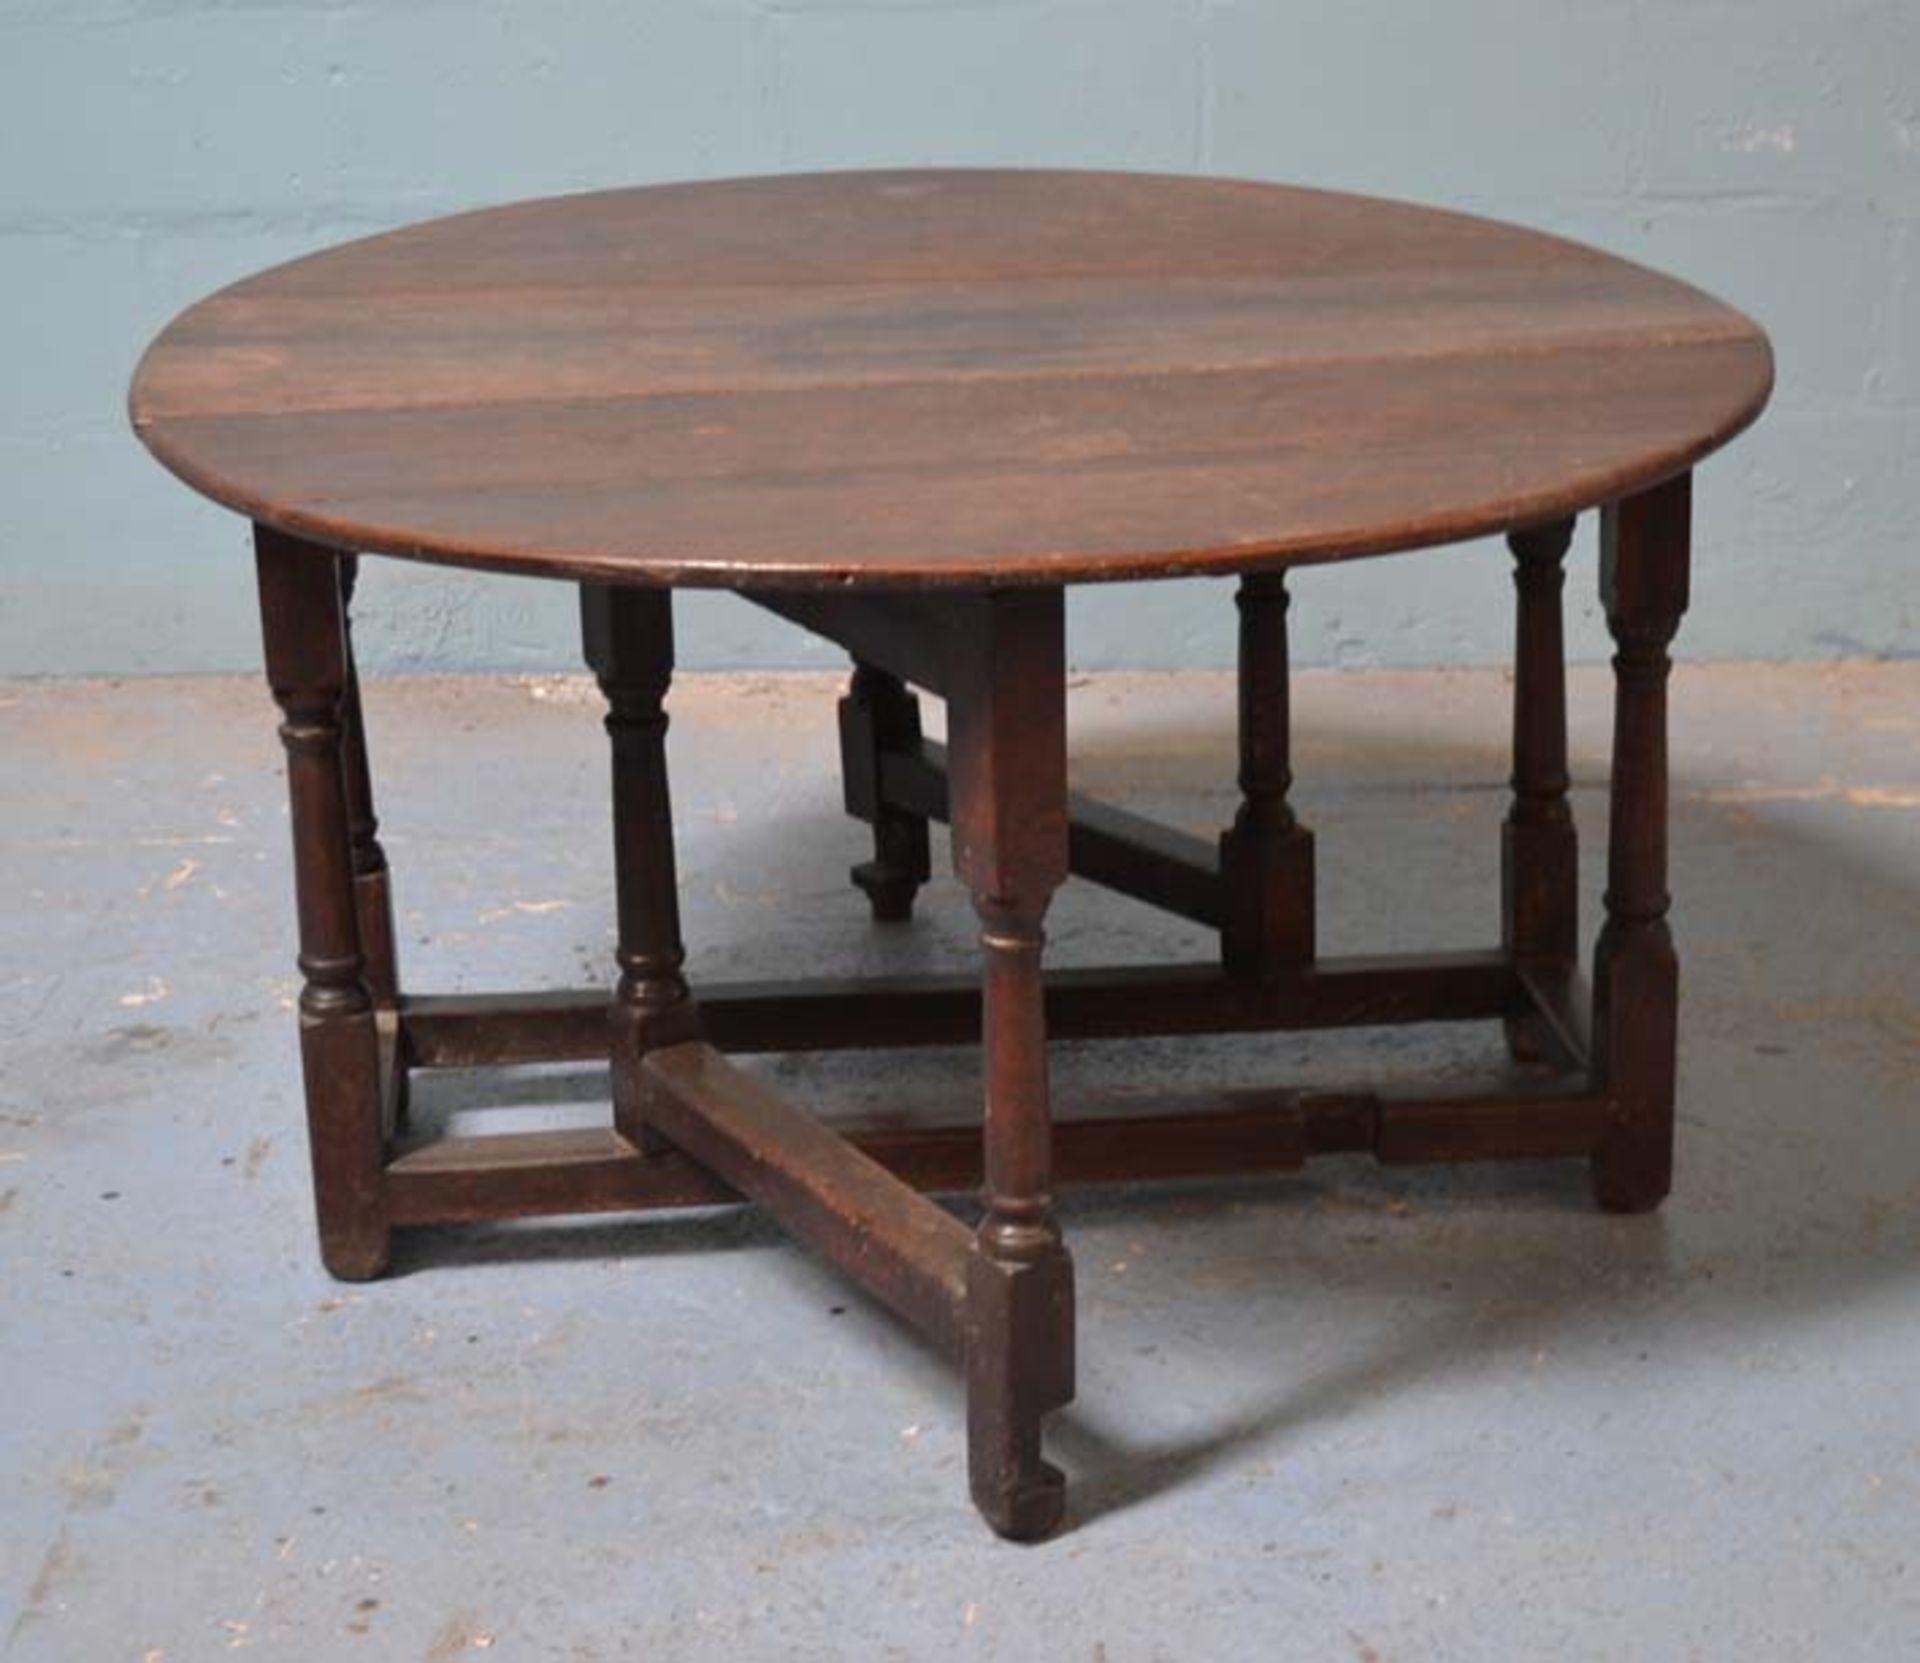 *ANTIQUE OAK ROUND DROP DOWN TABLE, CIRCA 1800. 1420MM ( 56" ) WIDE X 1205MM ( 47.5" ) DEEP X - Image 4 of 4